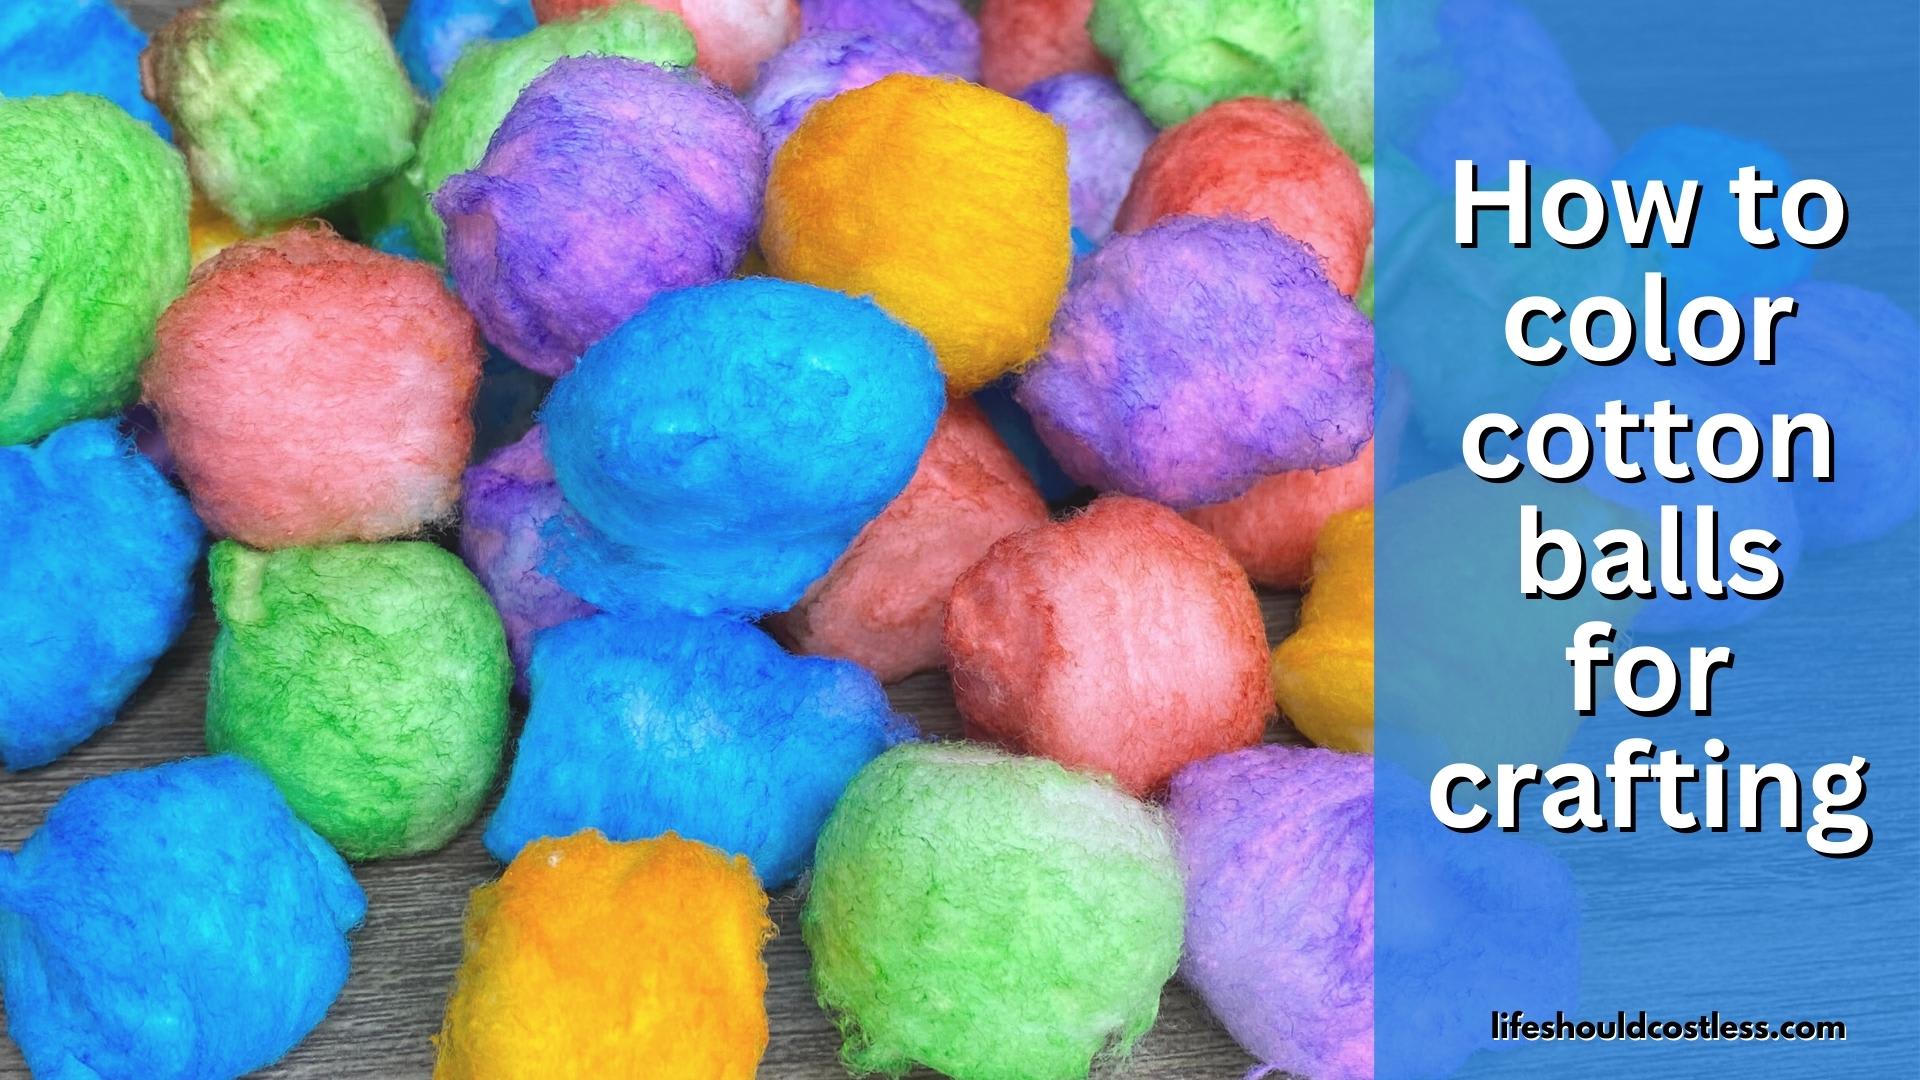 Crafts with Cotton Balls for Kids & Adults! - DIY Candy